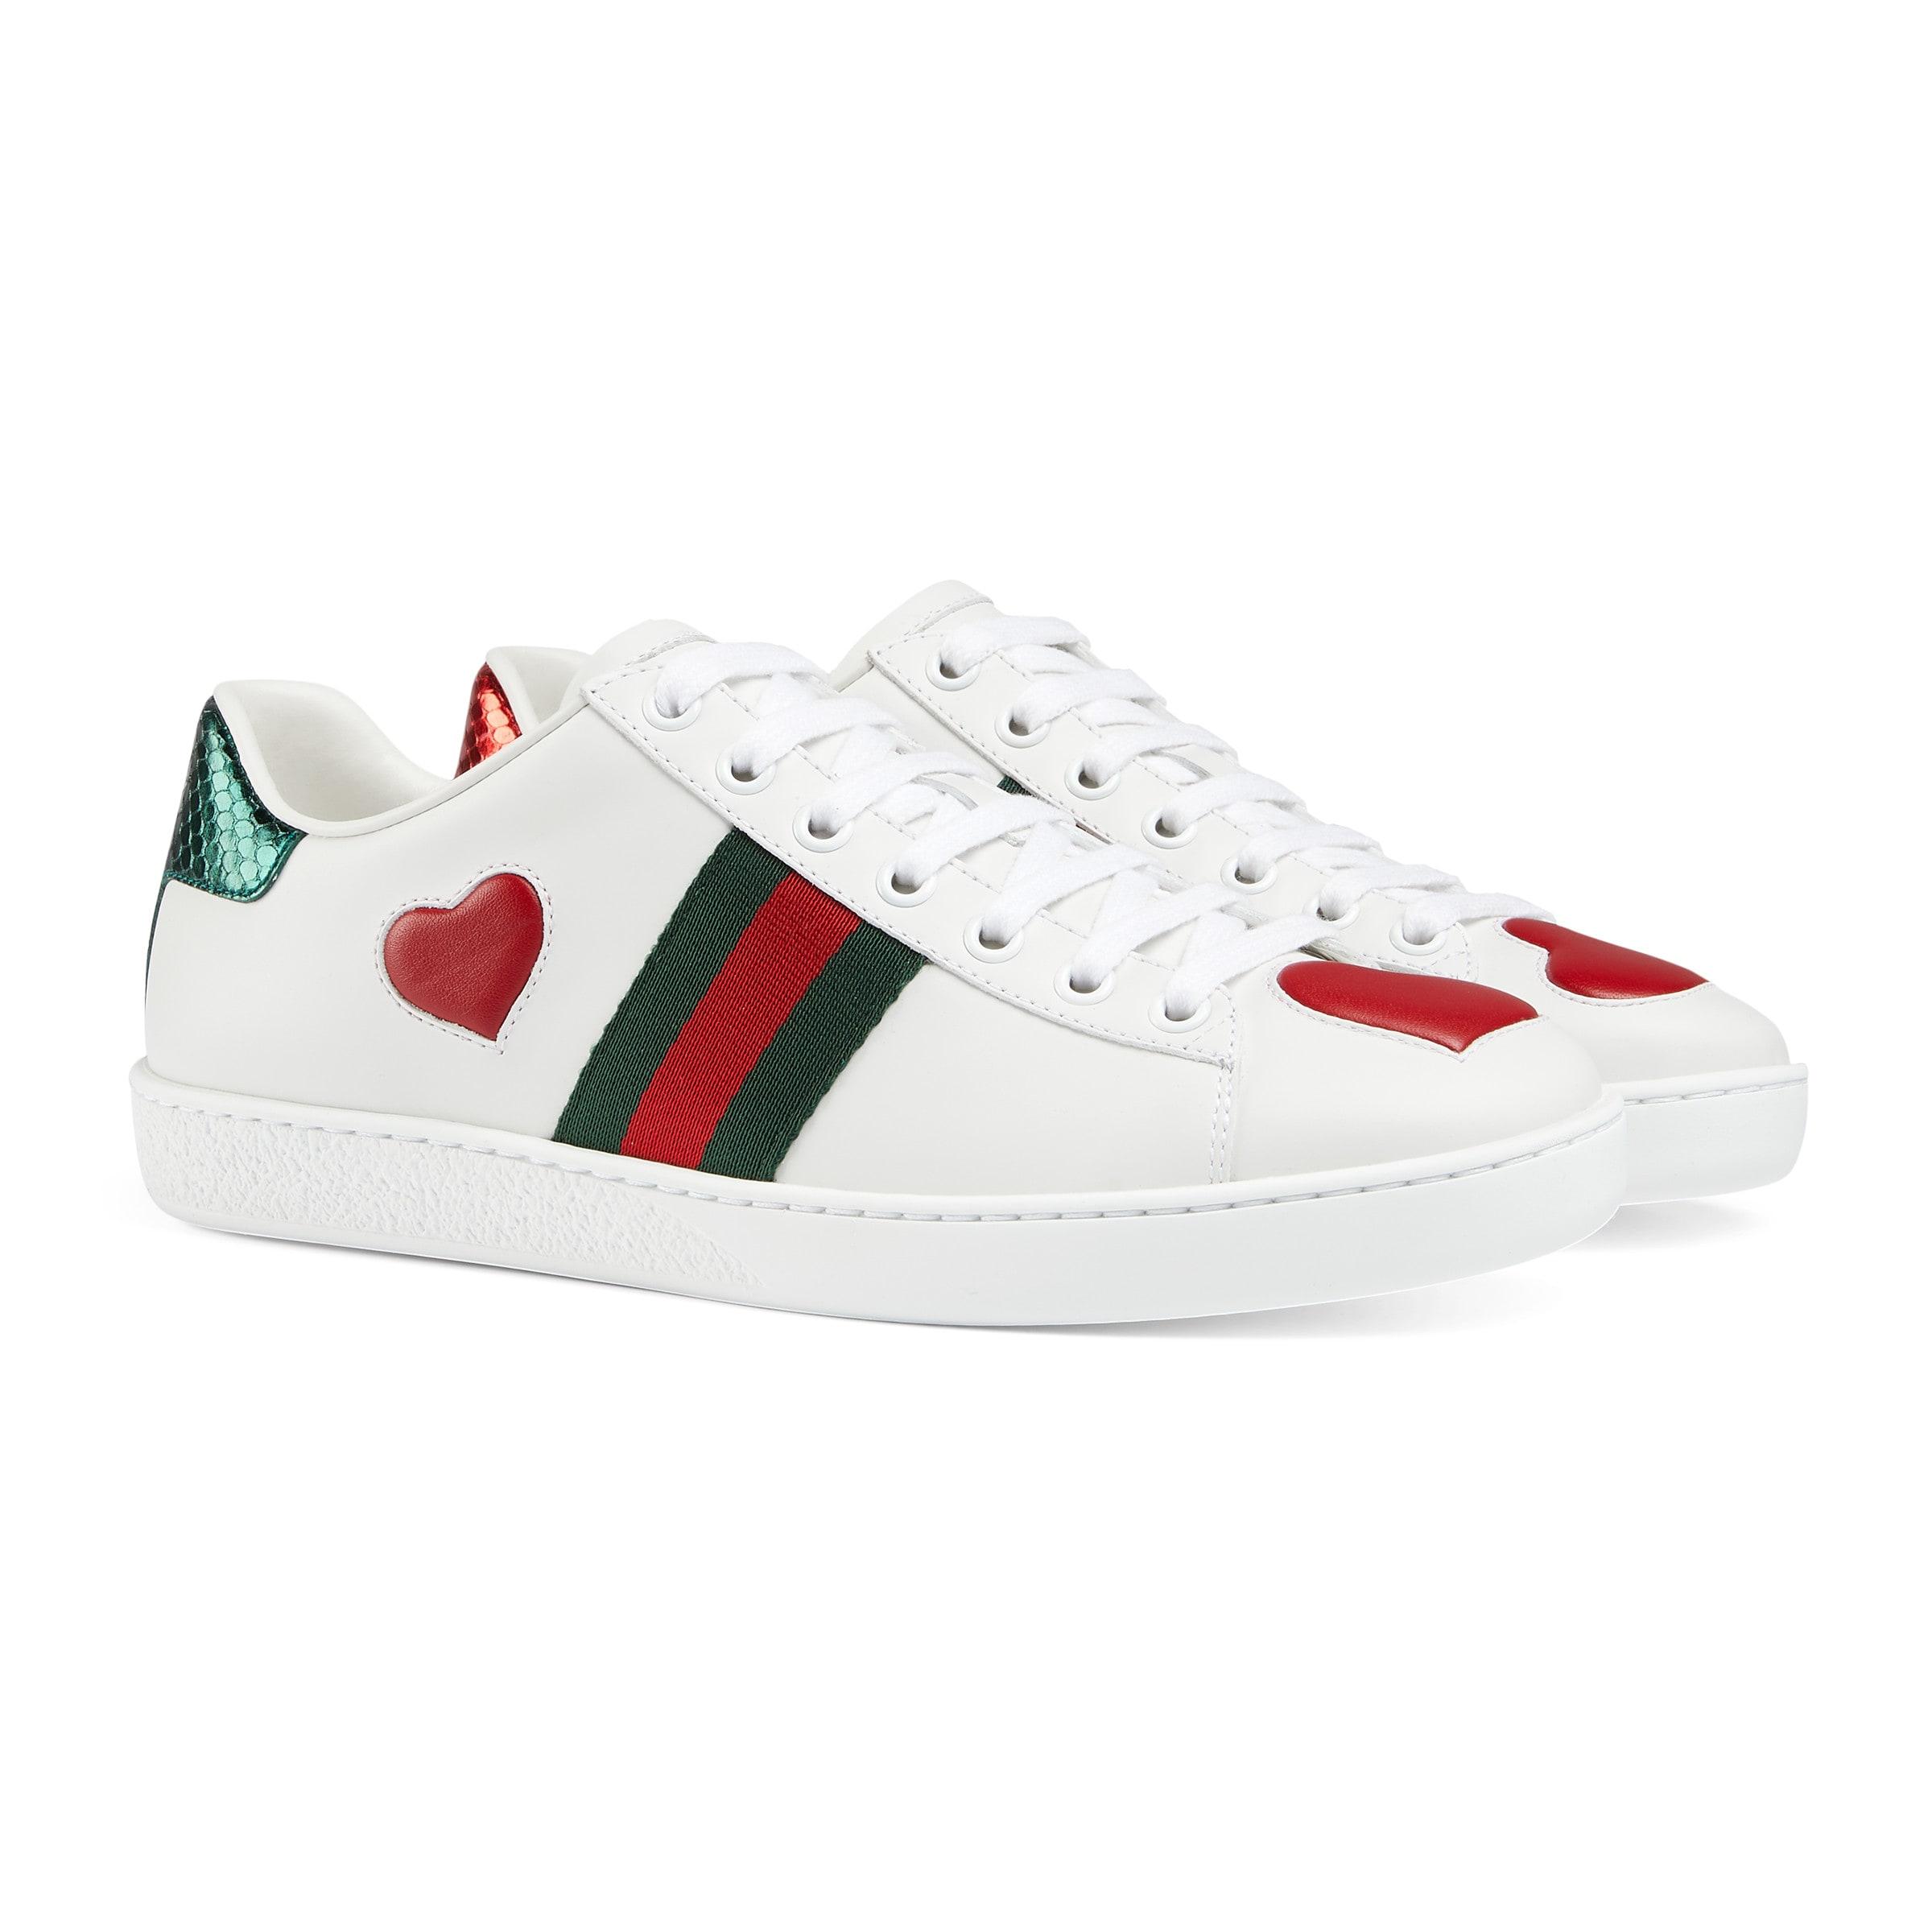 Gucci Ace Heart-embellished Leather Sneakers in White | Lyst